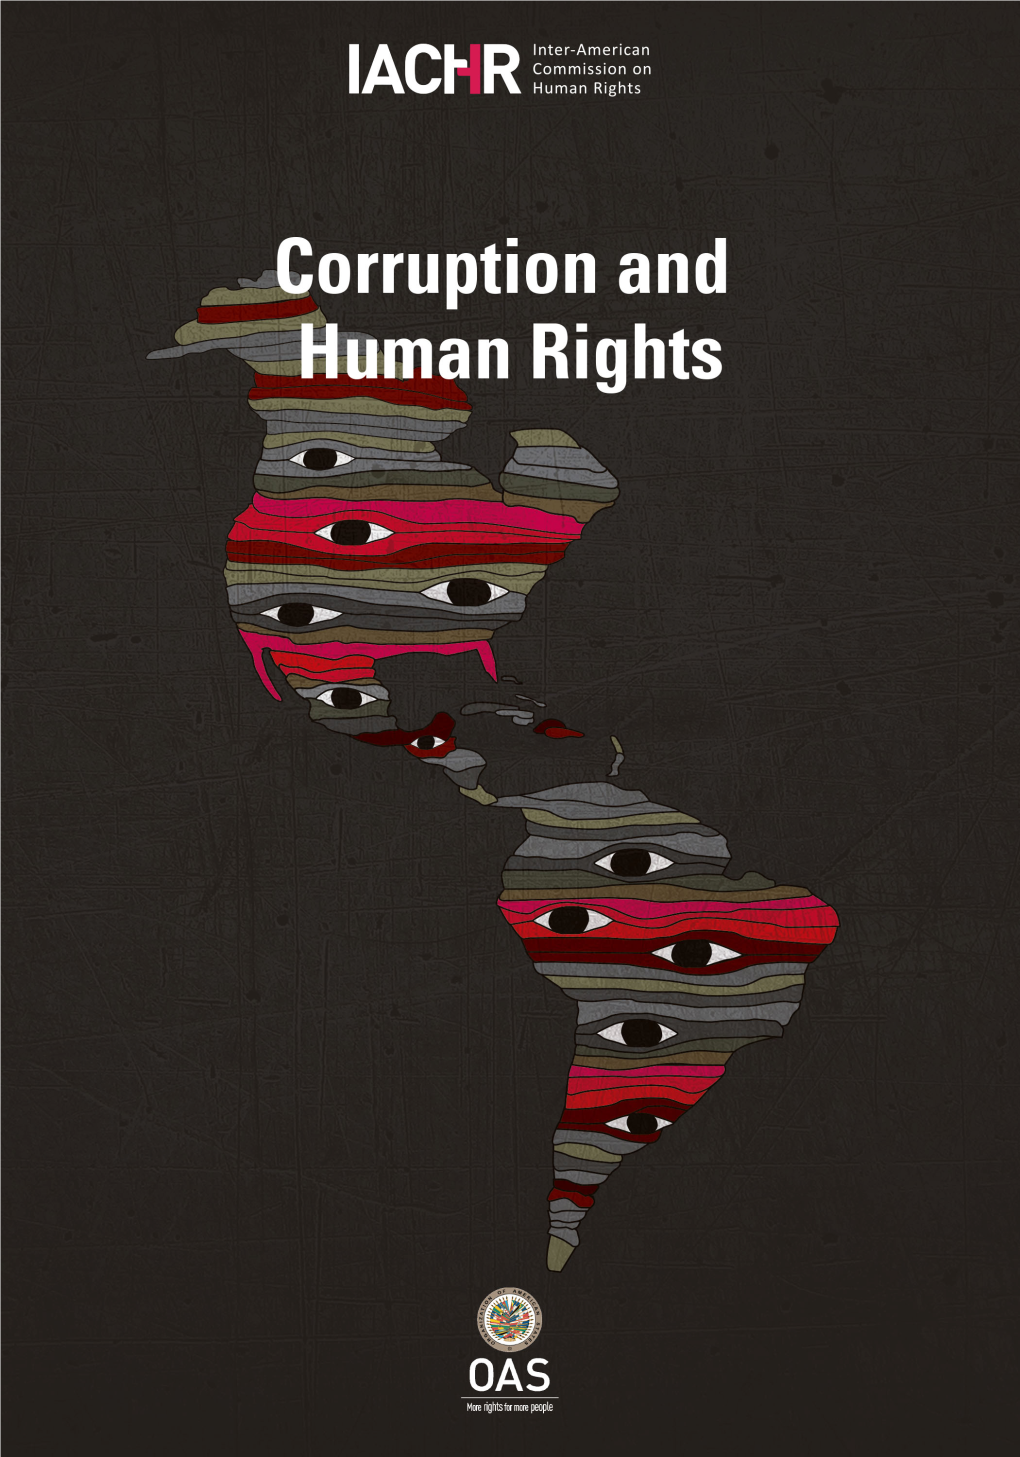 Corruption and Human Rights in the Americas: Inter-American Standards